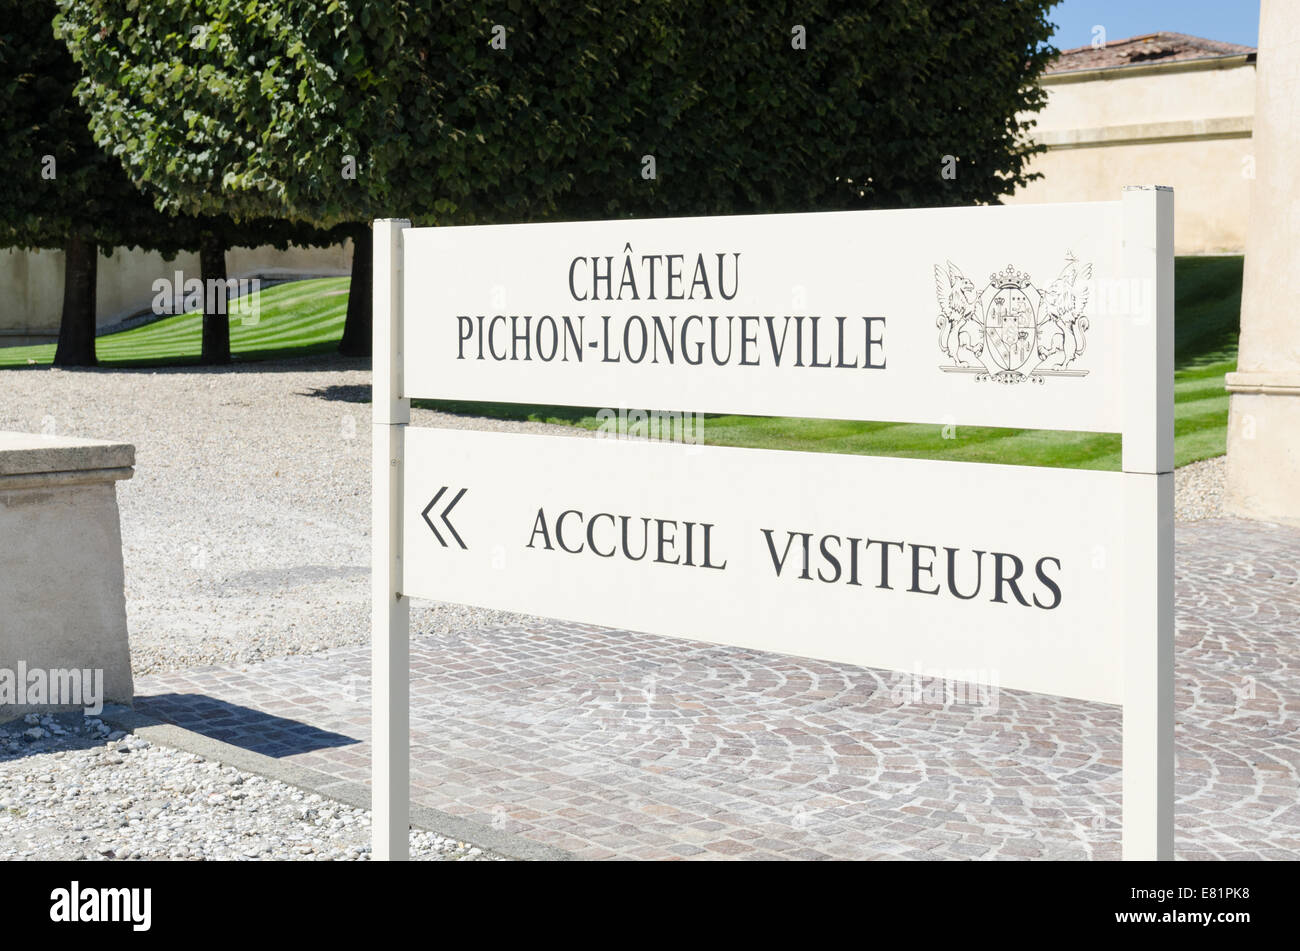 Sign for visitors to Chateau Pichon-Longueville in the Pauillac region of Bordeaux Stock Photo